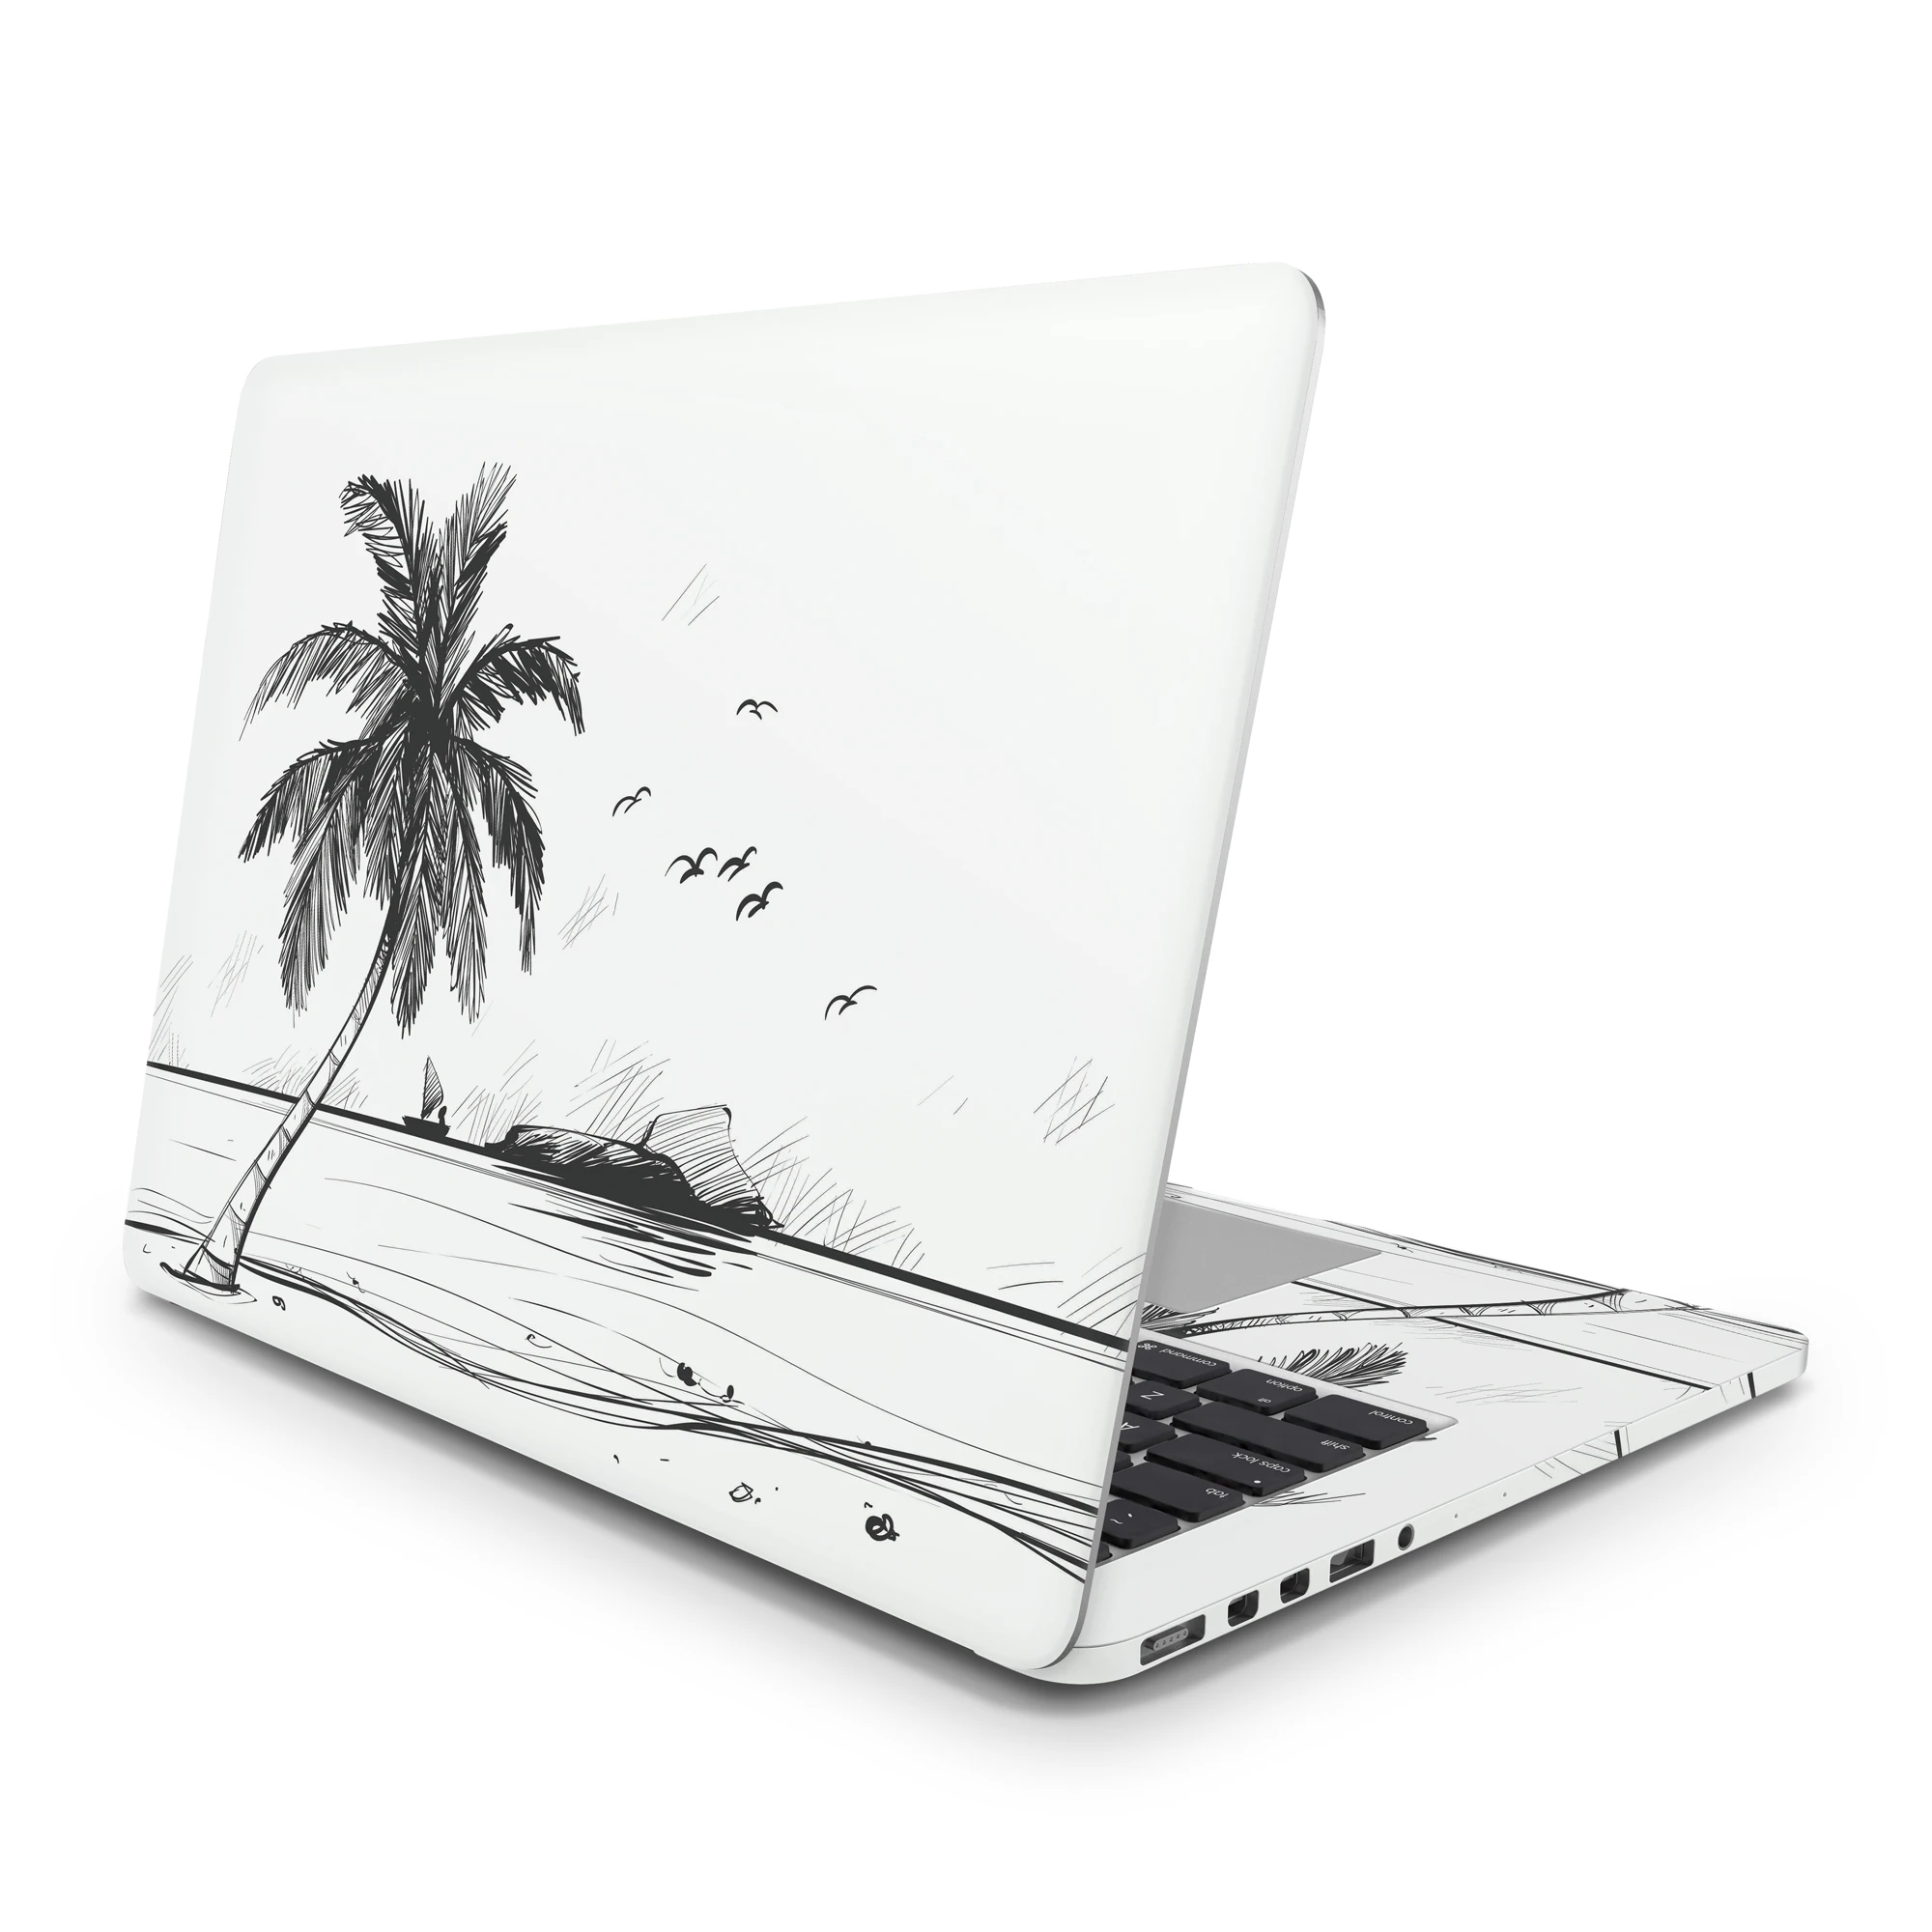 

Sticker Master Beach Sketch Laptop Vinyl Sticker Skin Cover For 10 12 13 14 15.4 15.6 16 17 19 " Inc Notebook Decal For Macbook,Asus,Acer,Hp,Lenovo,Huawei,Dell,Msi,Apple,Toshiba,Compaq